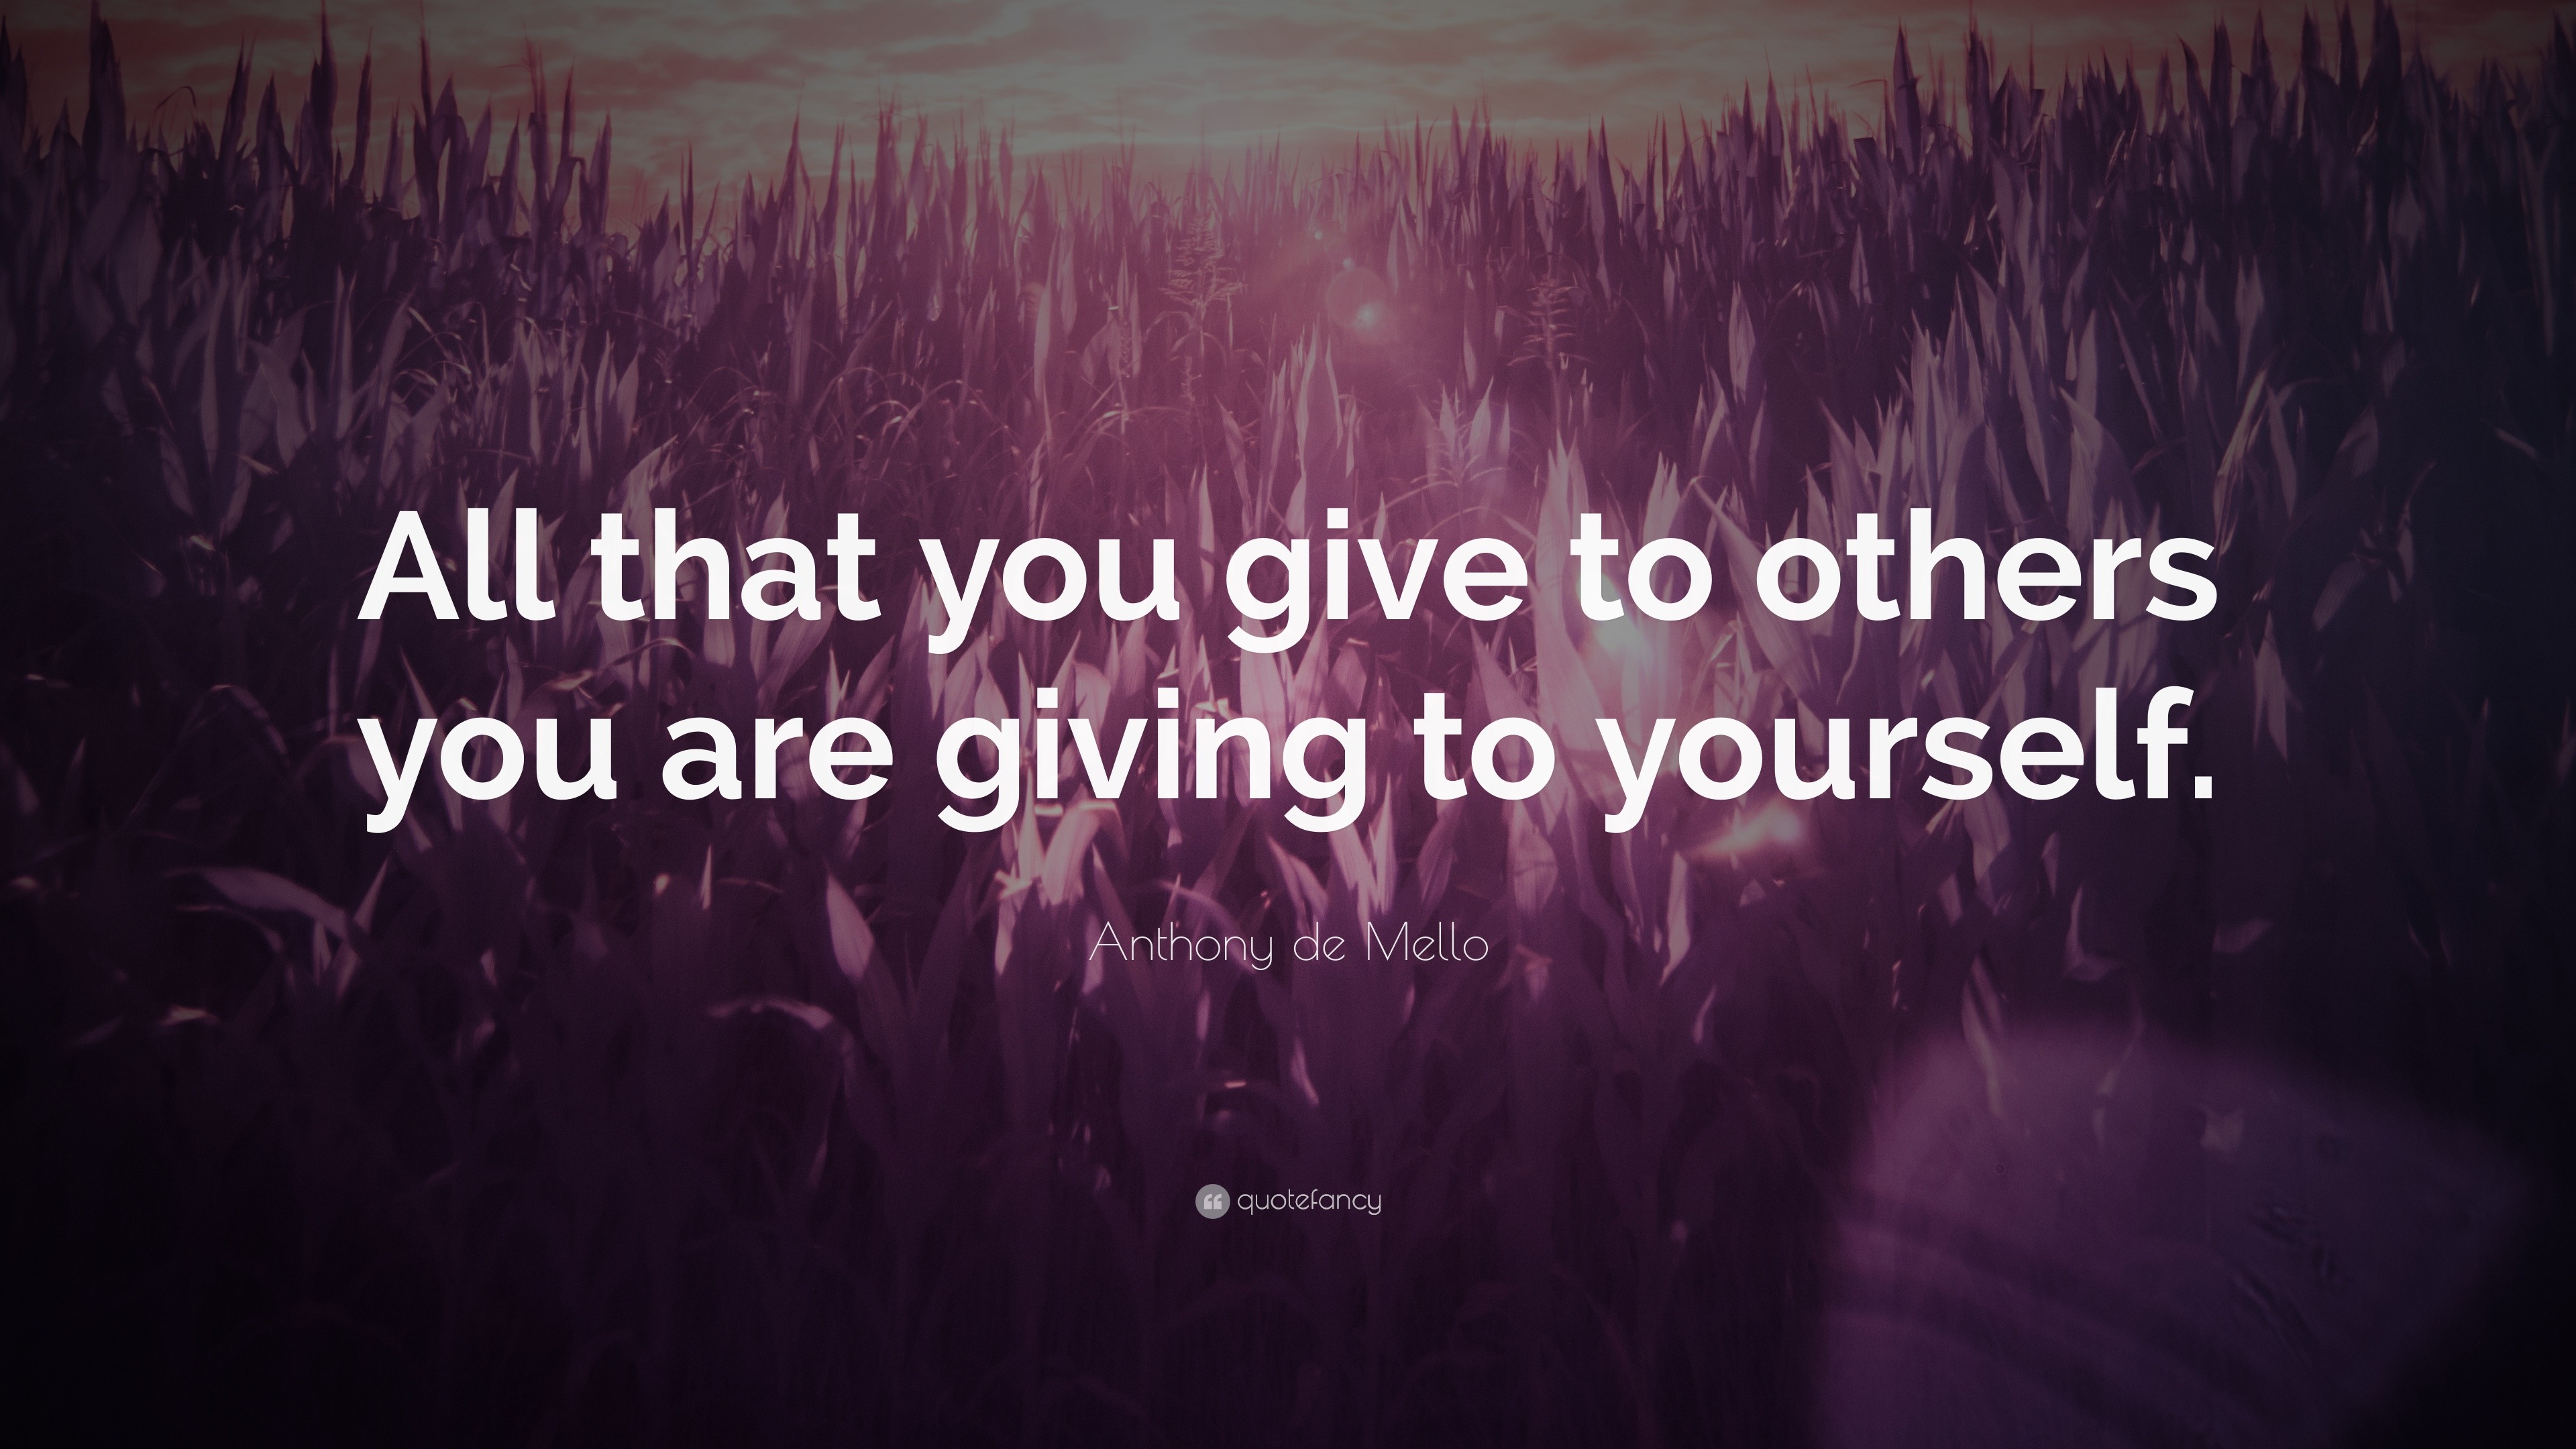 Anthony de Mello Quote “All that you give to others you